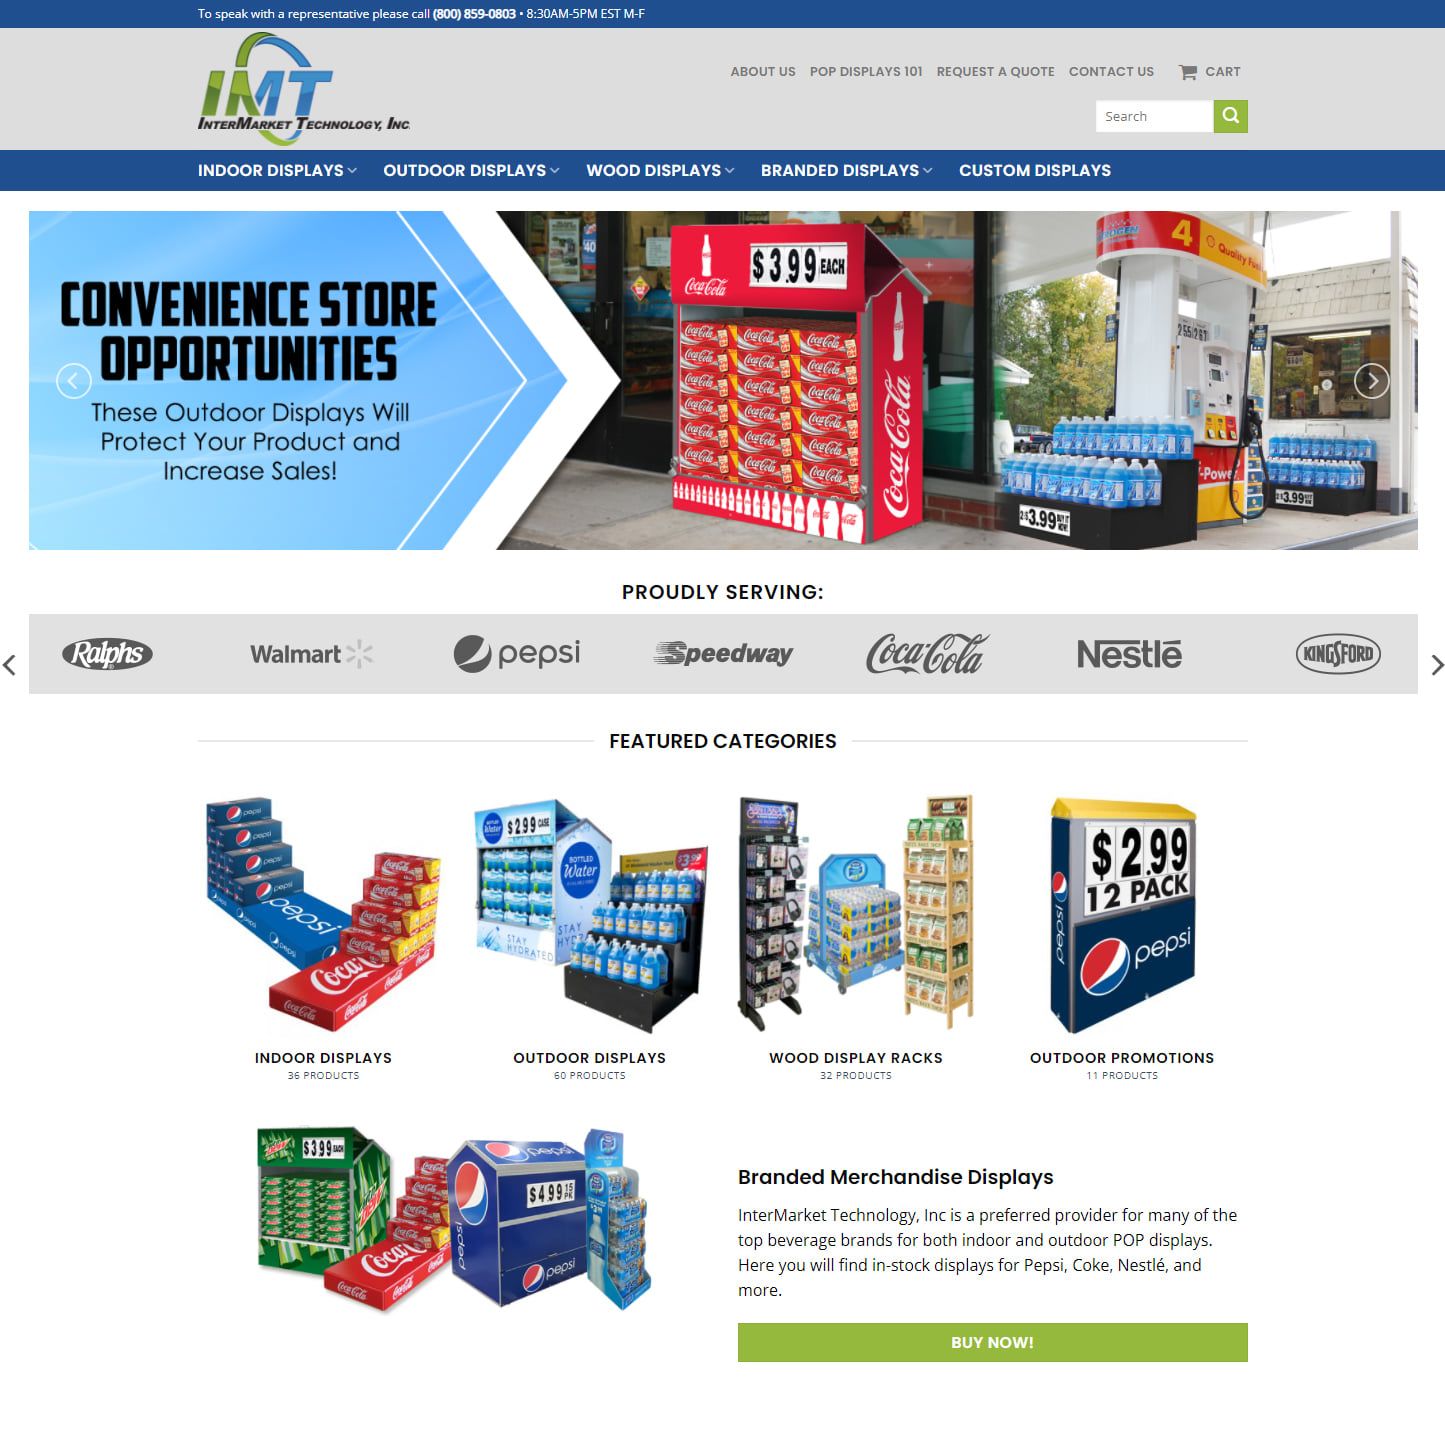 New InterMarket Technology Website Launches